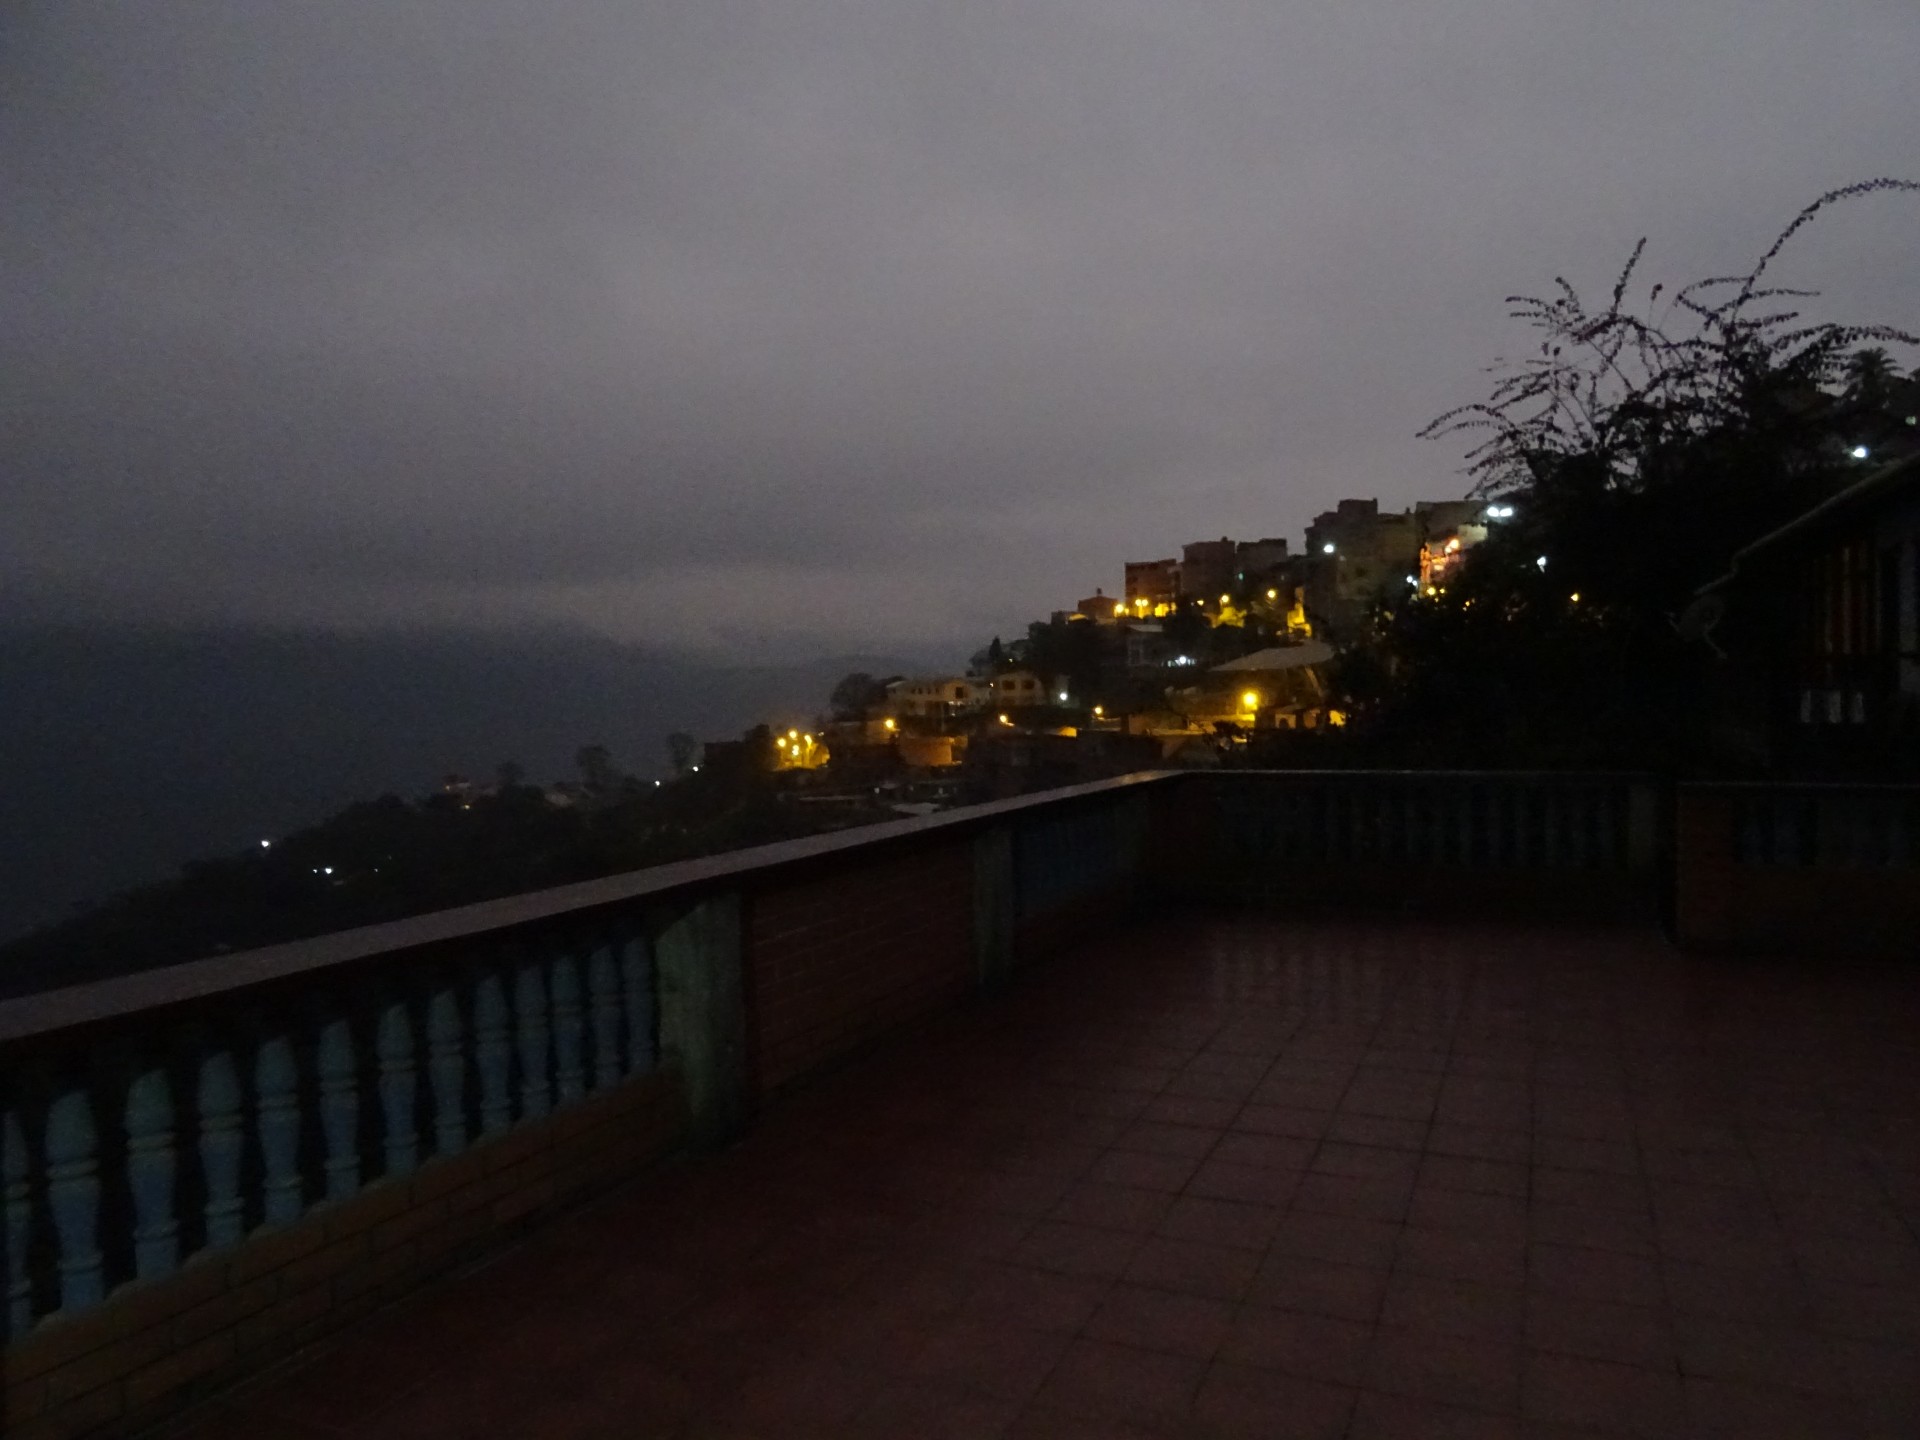 Coroico in the early hours. It's cold, wet and dark.